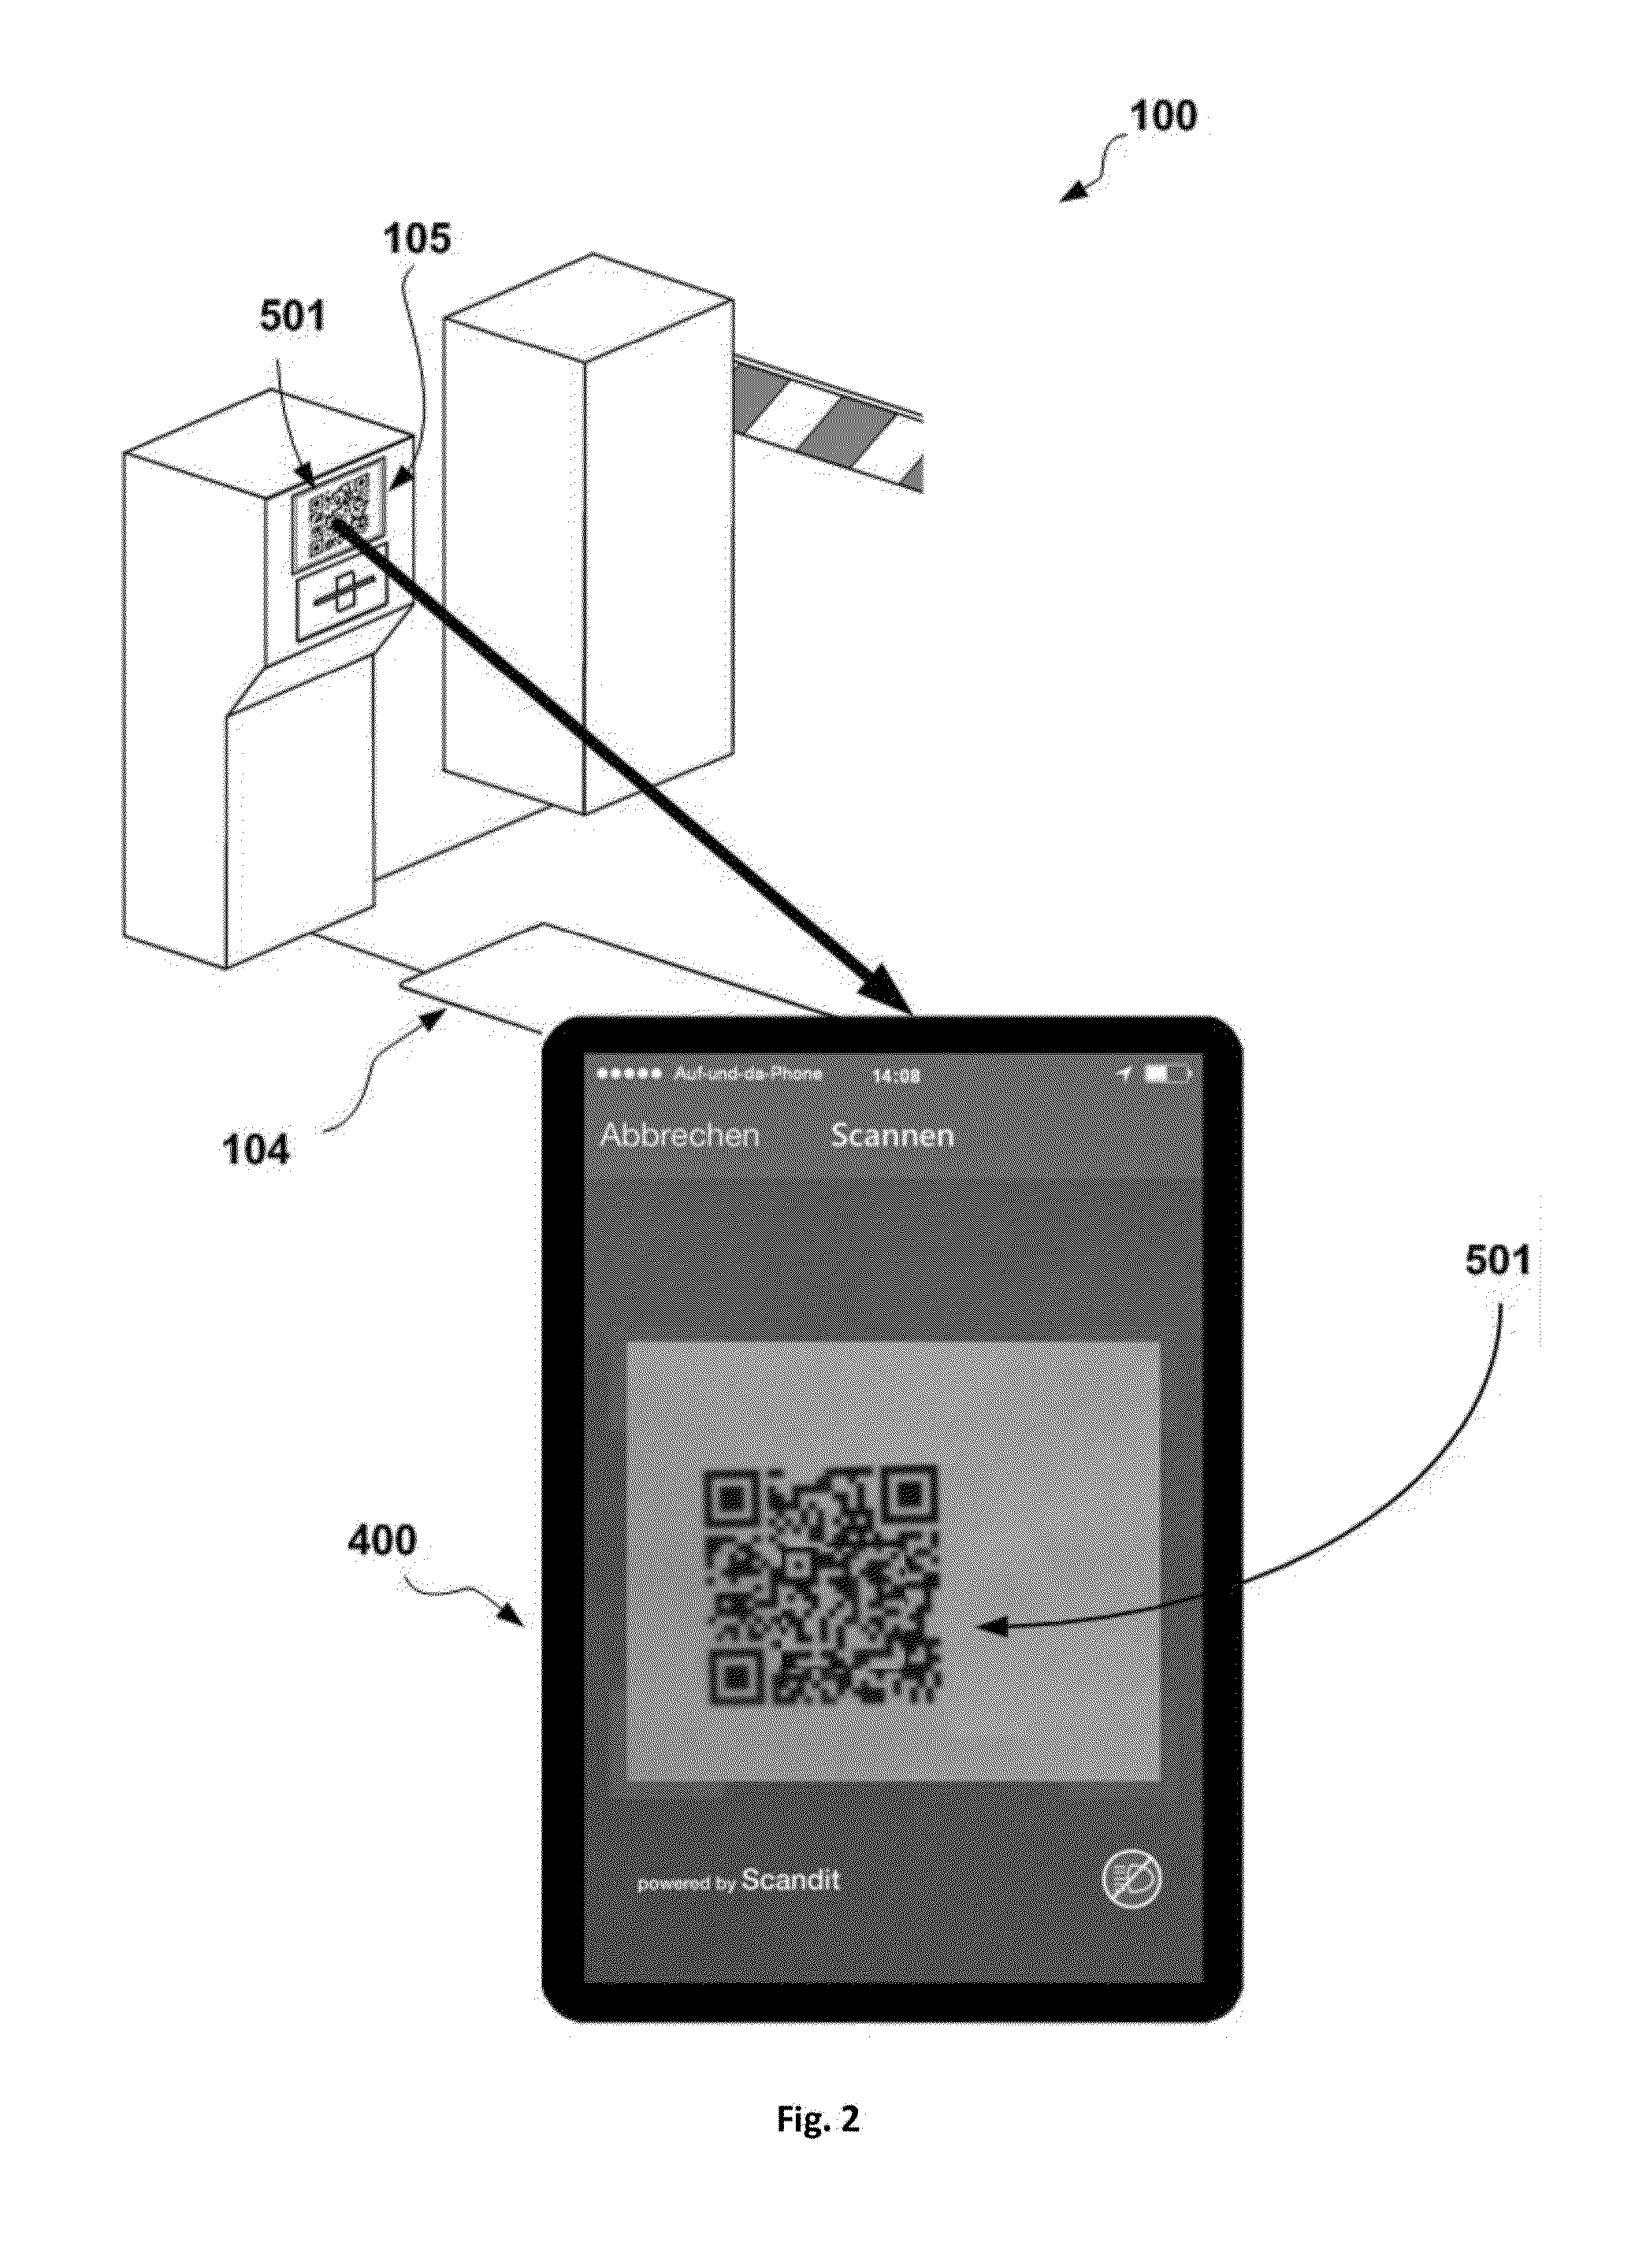 Method for the capturing and payment of parking transactions